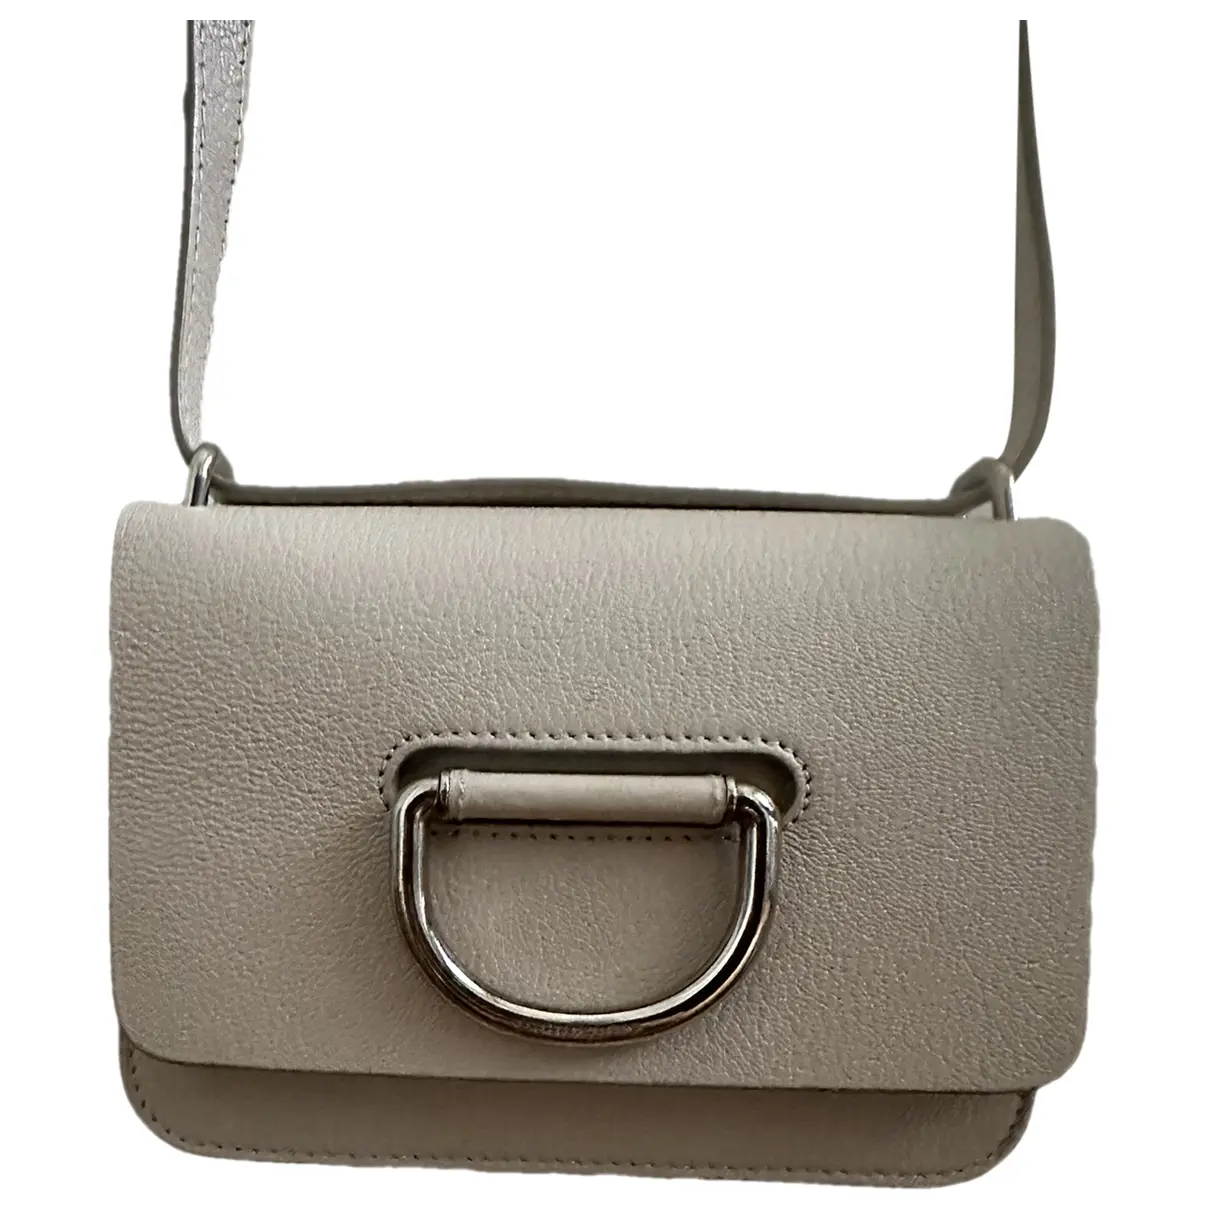 The D-ring leather crossbody bag